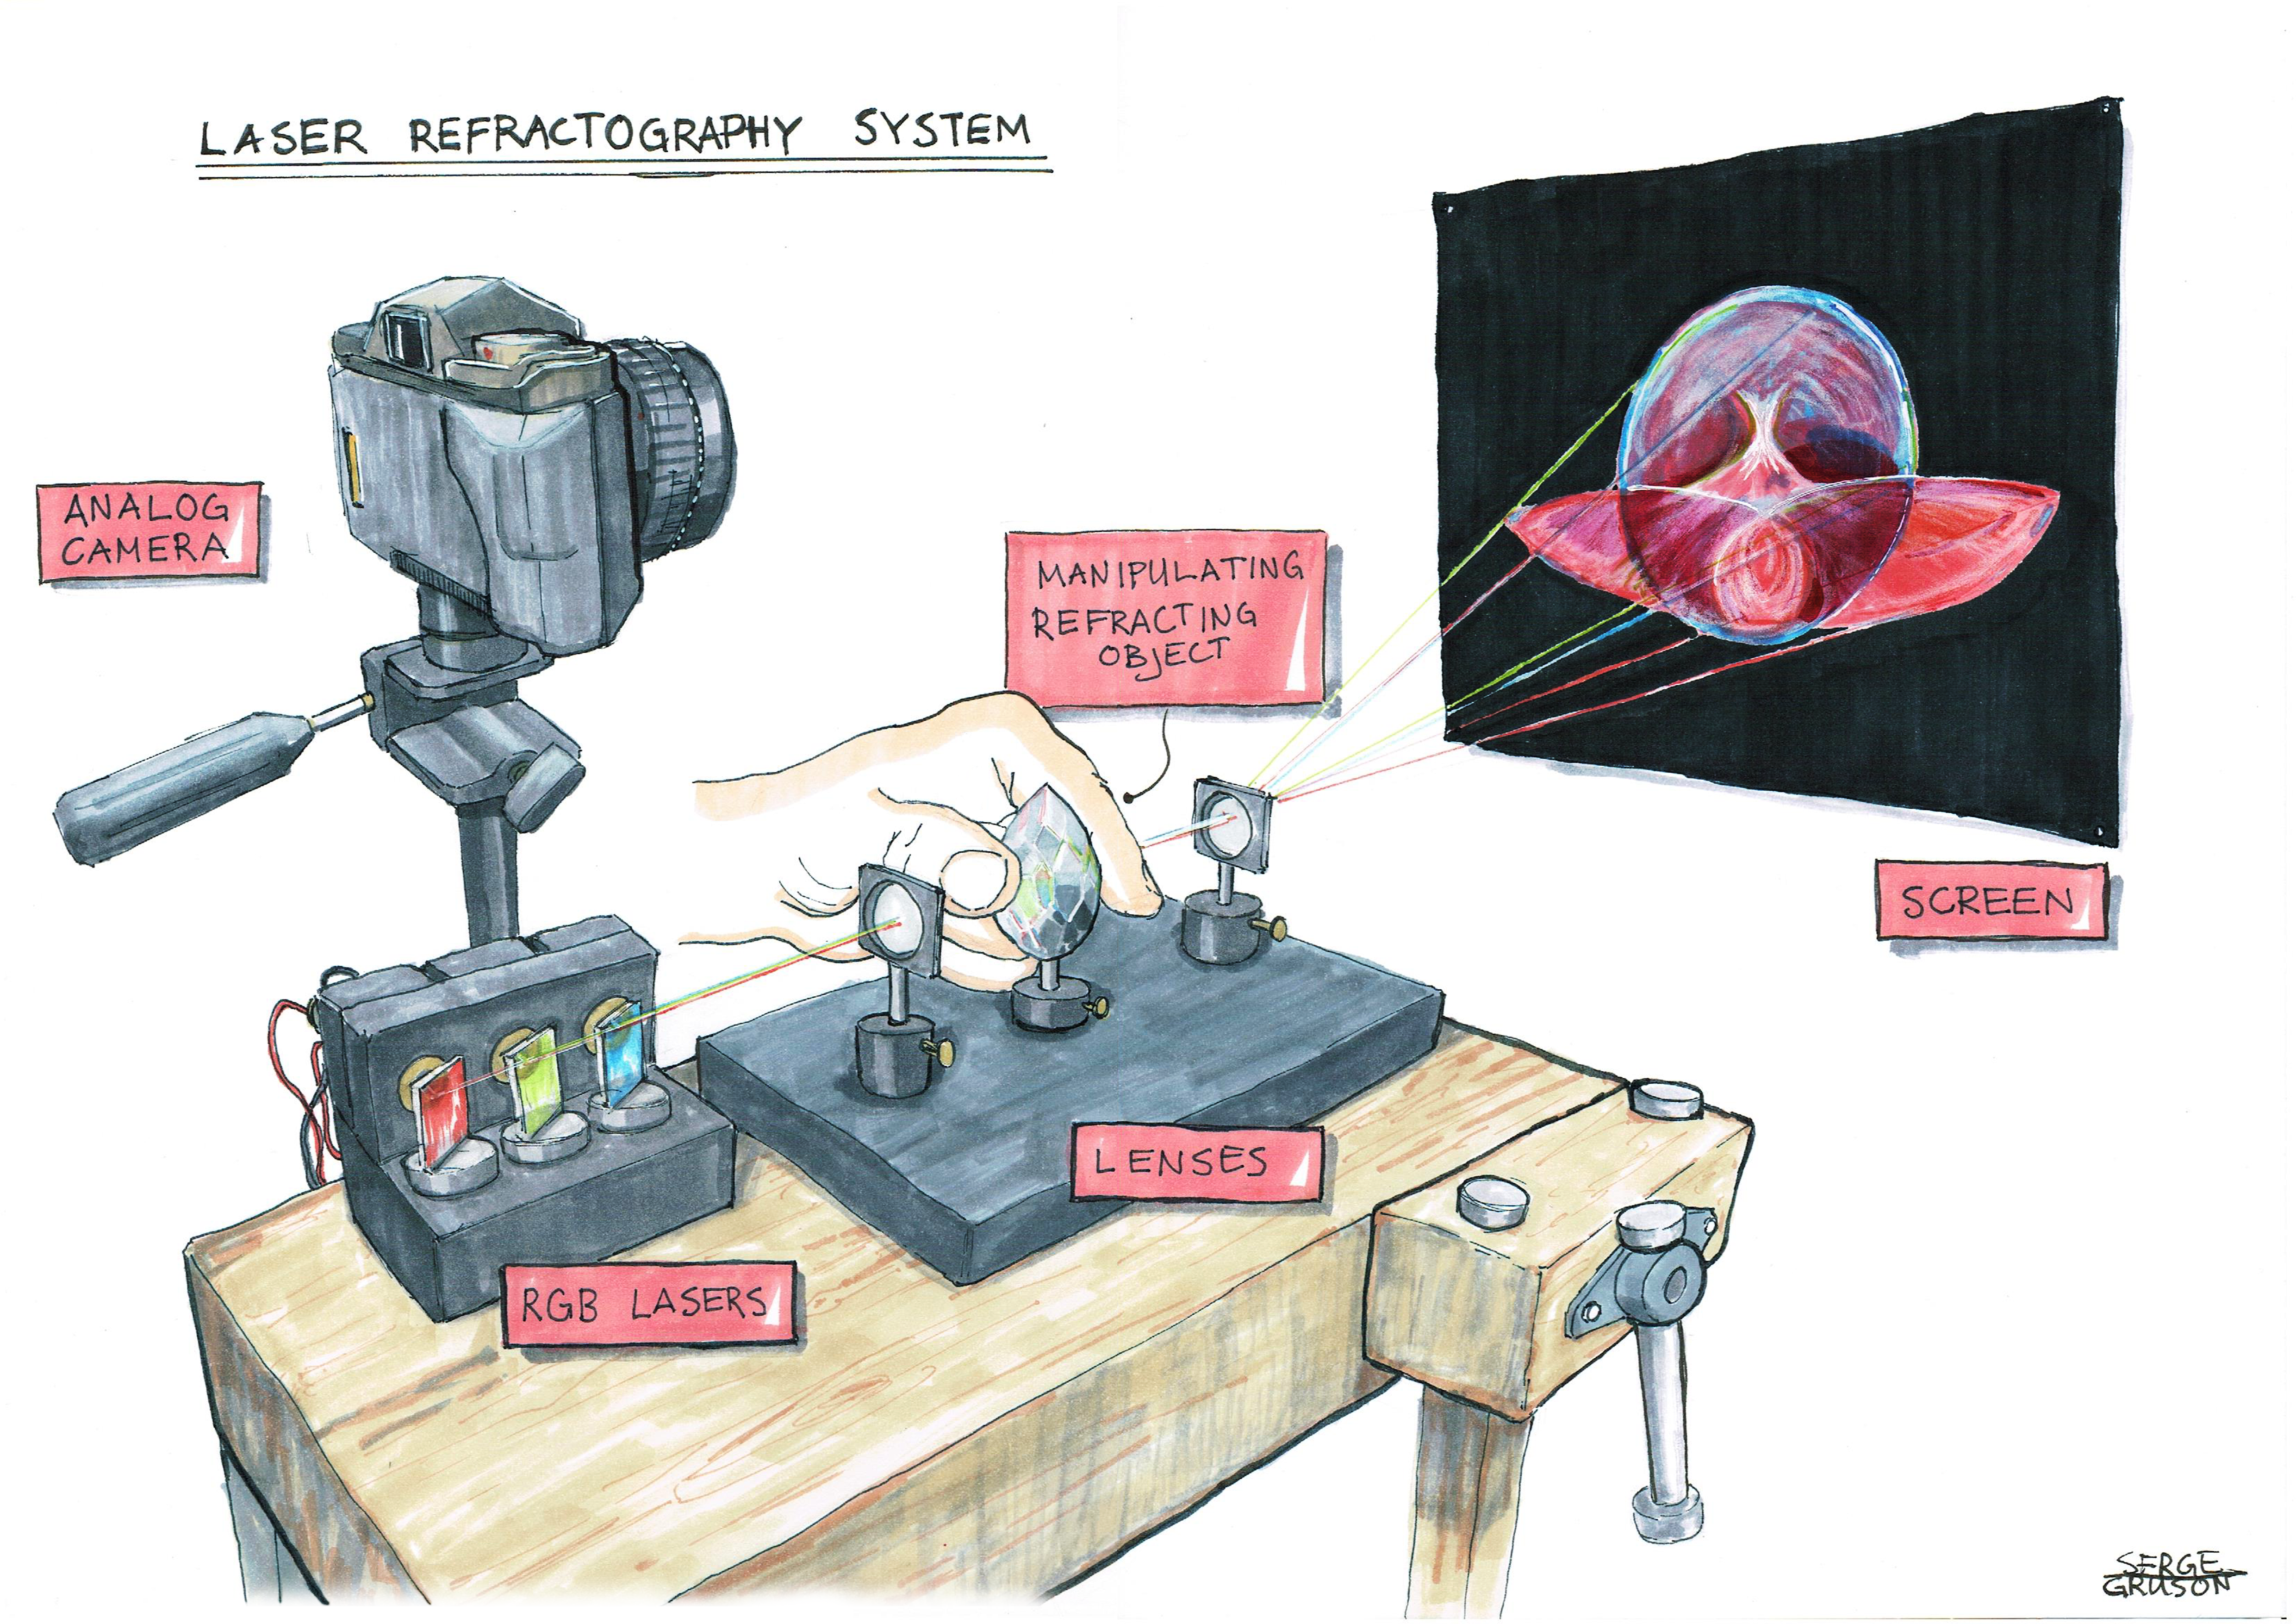 Laser Refractography System